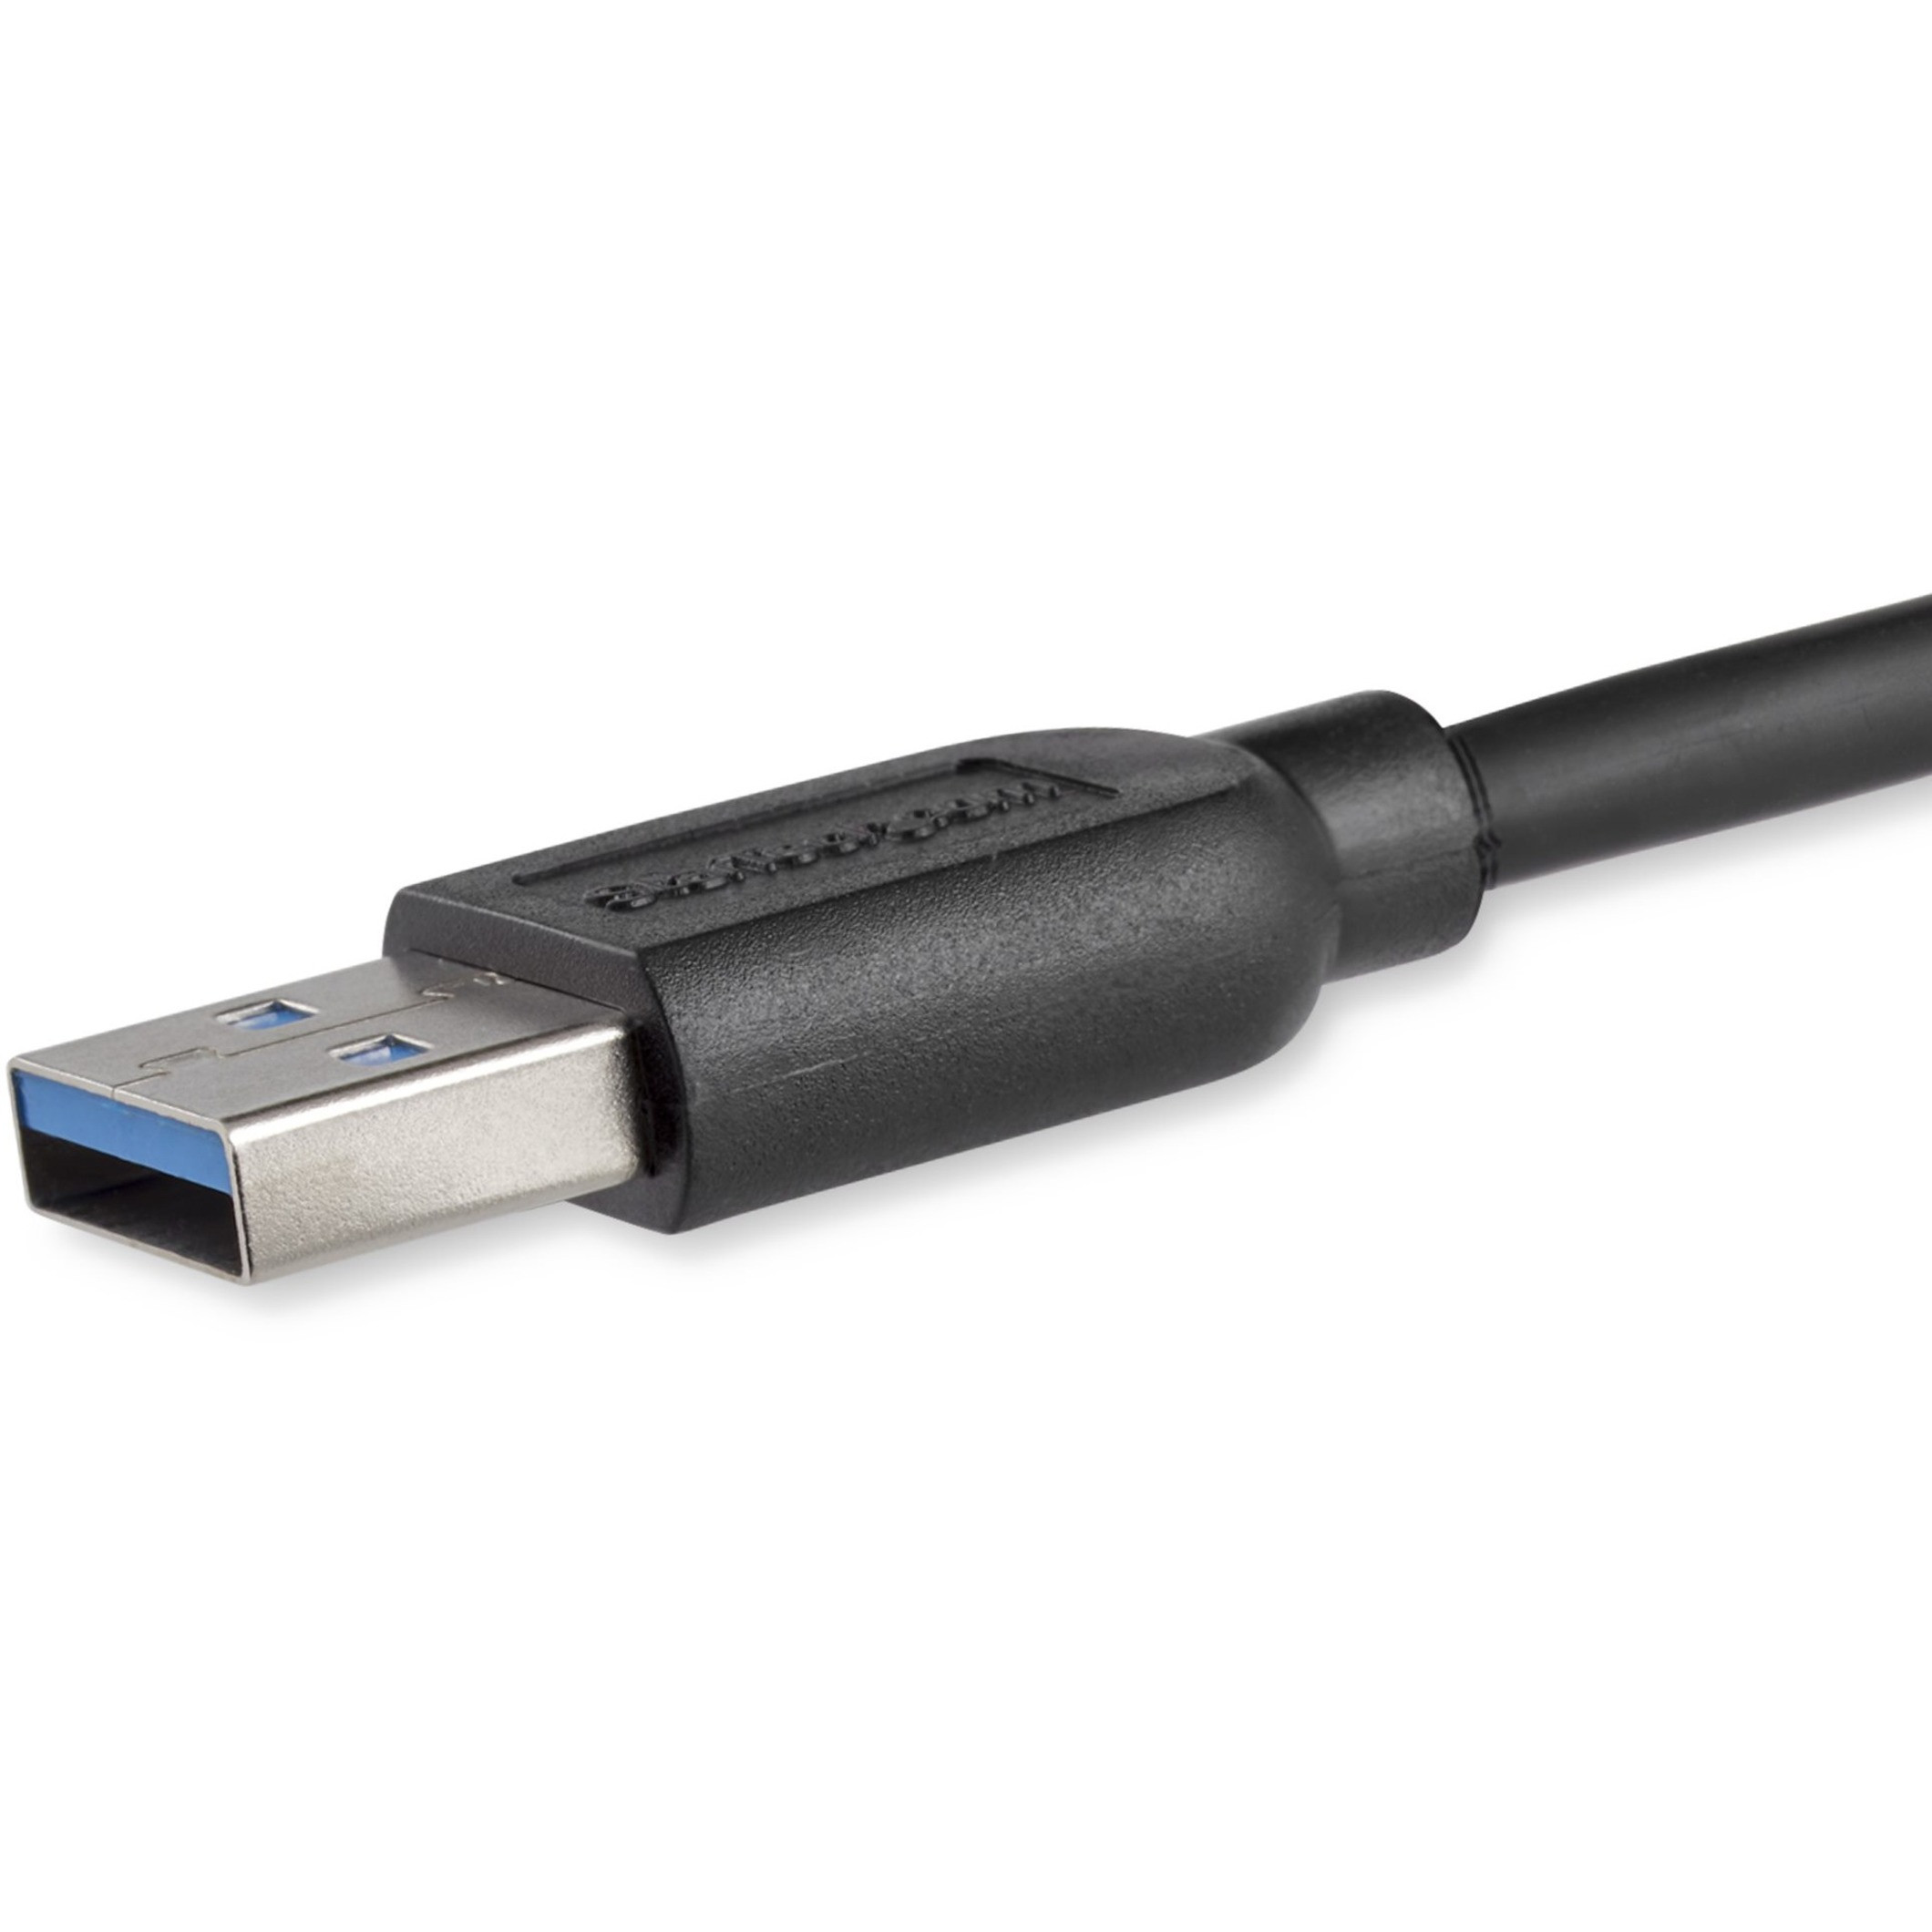 USB-A 3.0 M/USB-C M 2m, VARIOUS SuperSpeed Cable Black